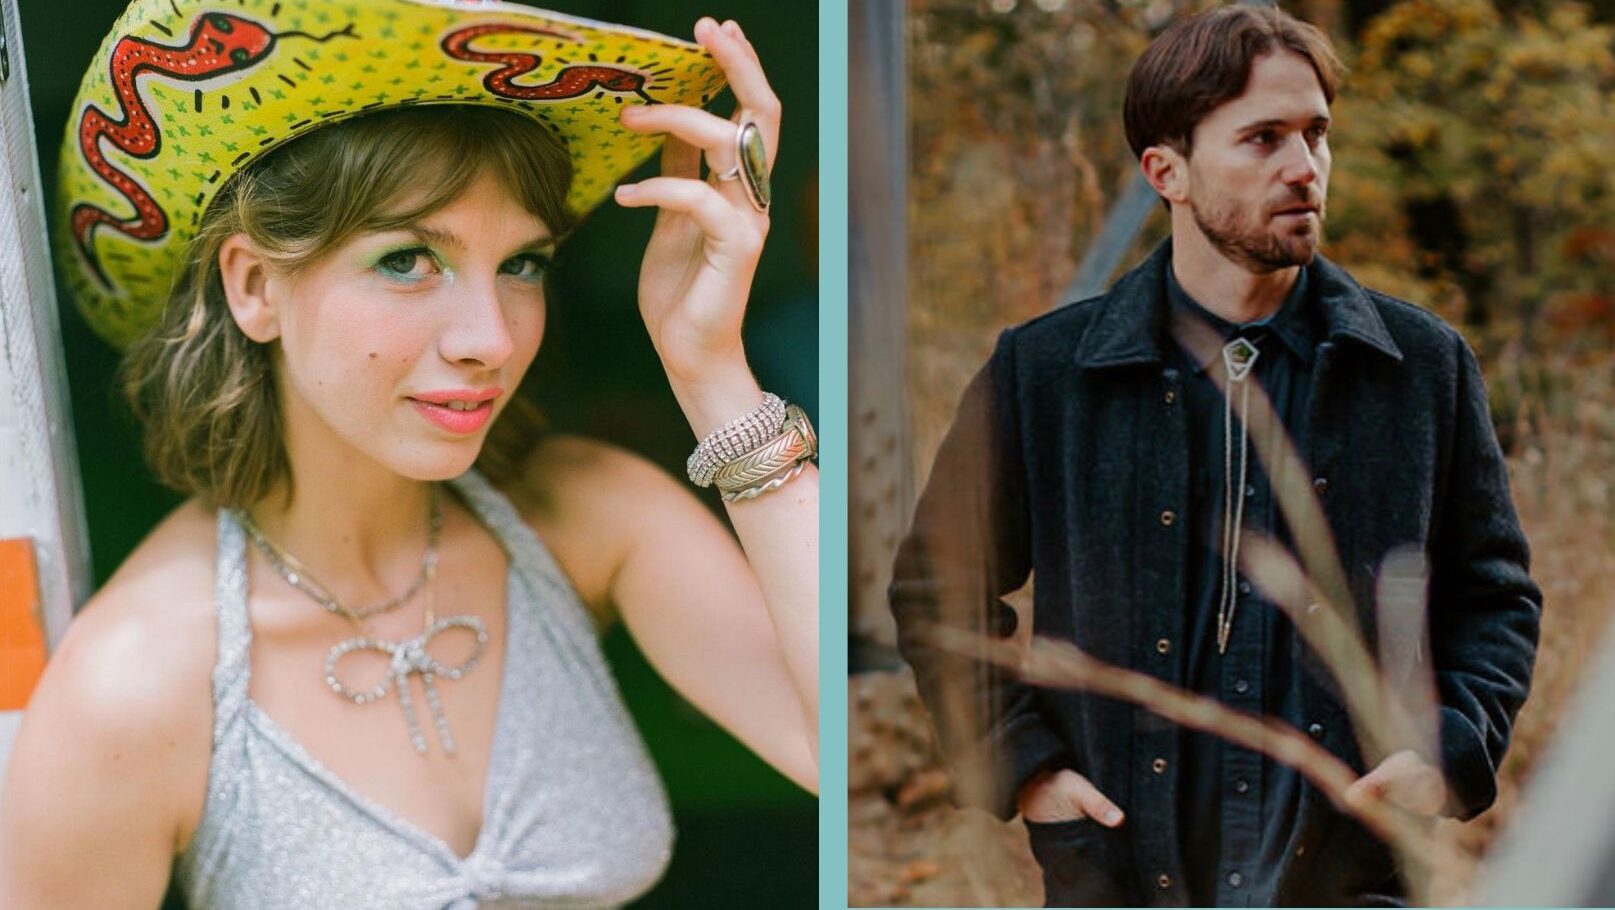 Collages photos of singer-songwriters Angela Autumn and Shay martin Lovette.